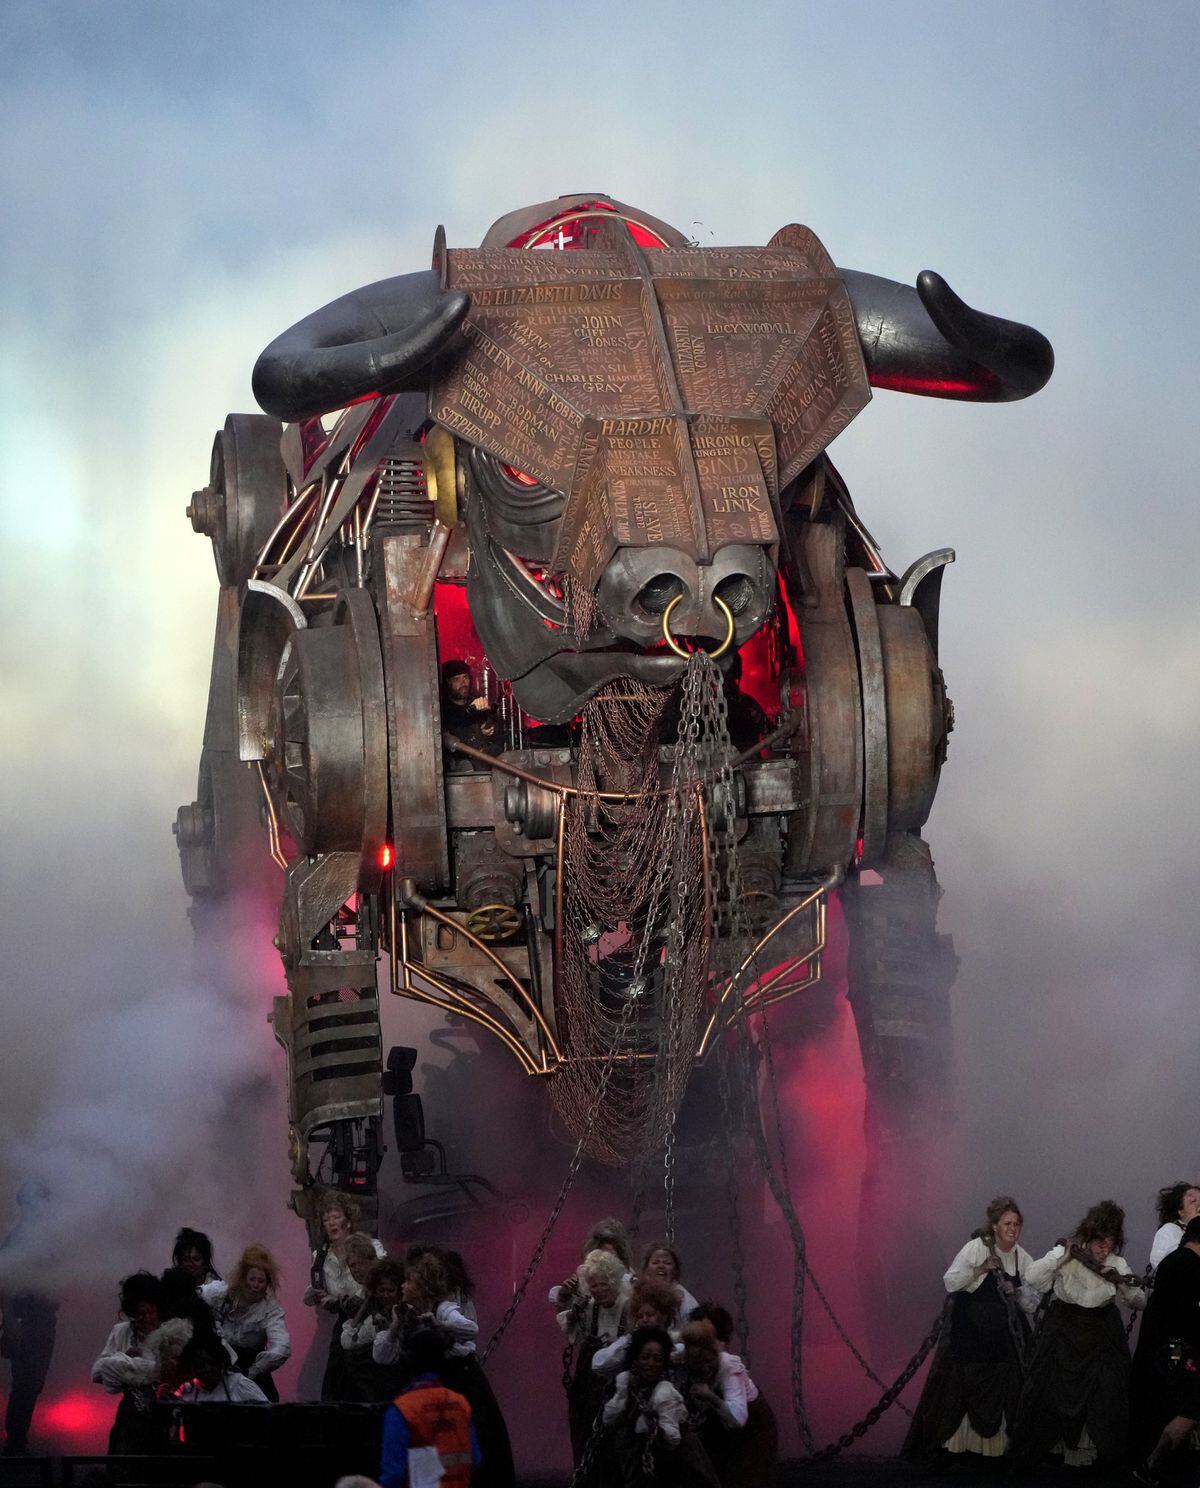 The Bull made a dramatic entrance into Alexander Stadium during the opening ceremony. Photo: Tim Goode/PA Wire.